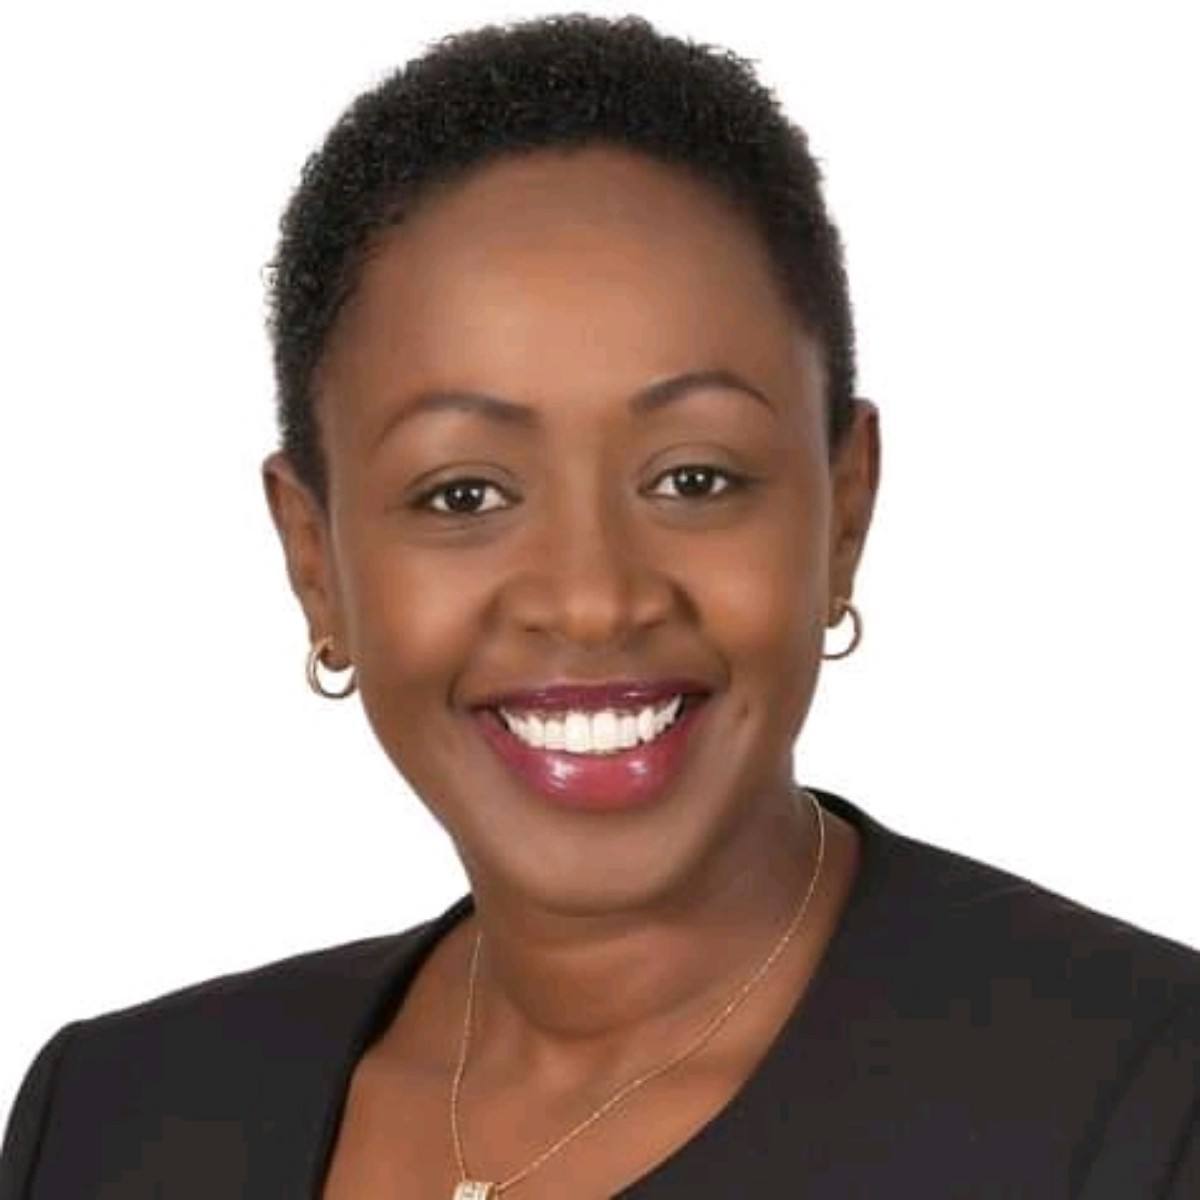 How old is Sabina Chege?